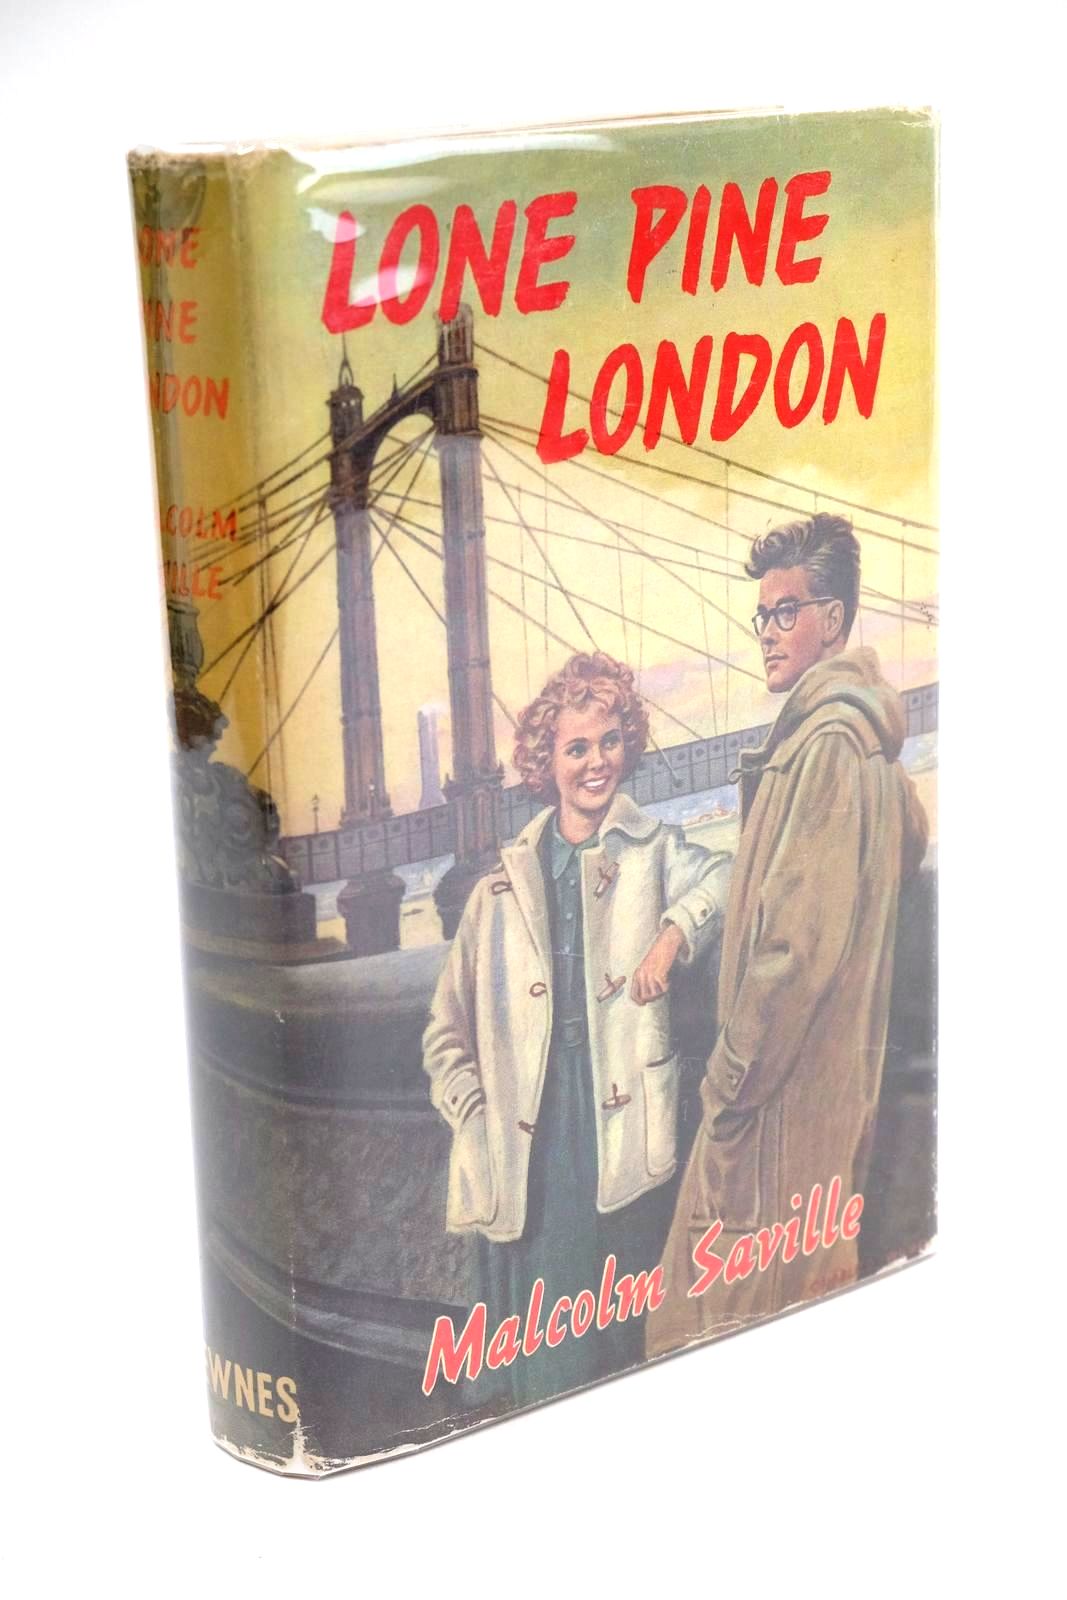 Photo of LONE PINE LONDON written by Saville, Malcolm published by George Newnes Ltd. (STOCK CODE: 1324327)  for sale by Stella & Rose's Books